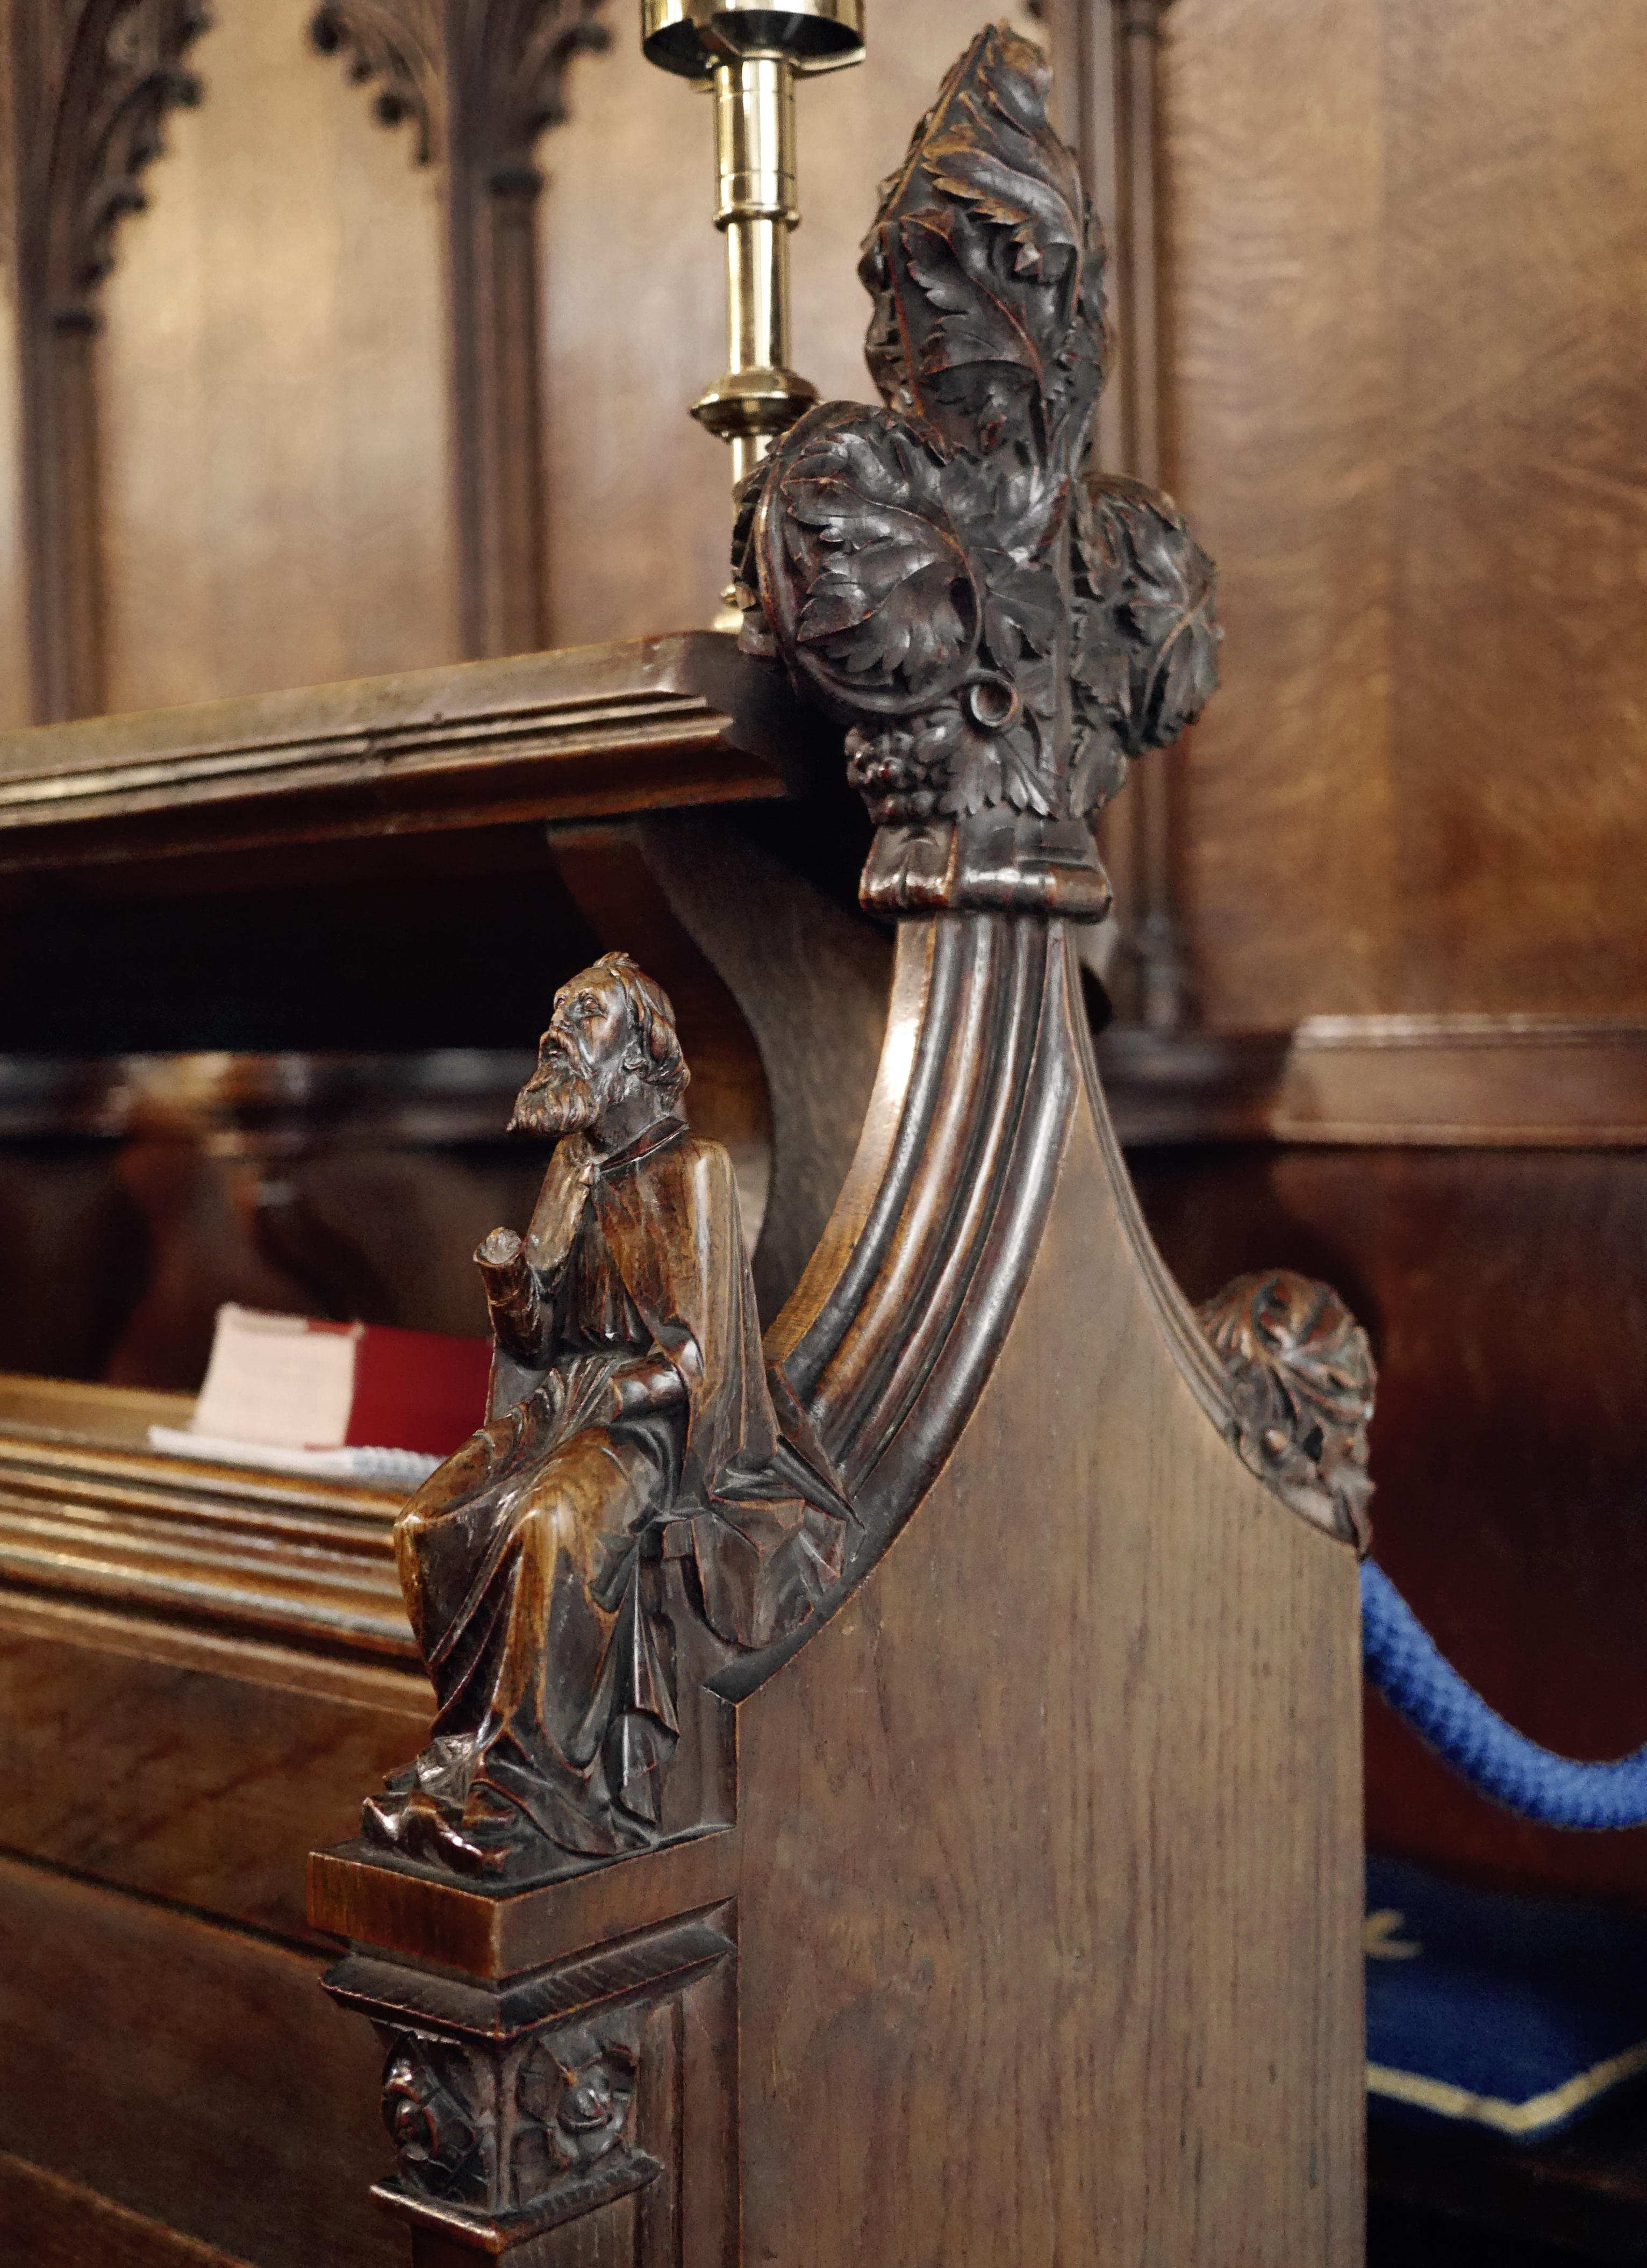 Decorative wooden features of a pew in Great Saint Mary's Church in Cambridge, featuring a carving of an old man and many rosettes